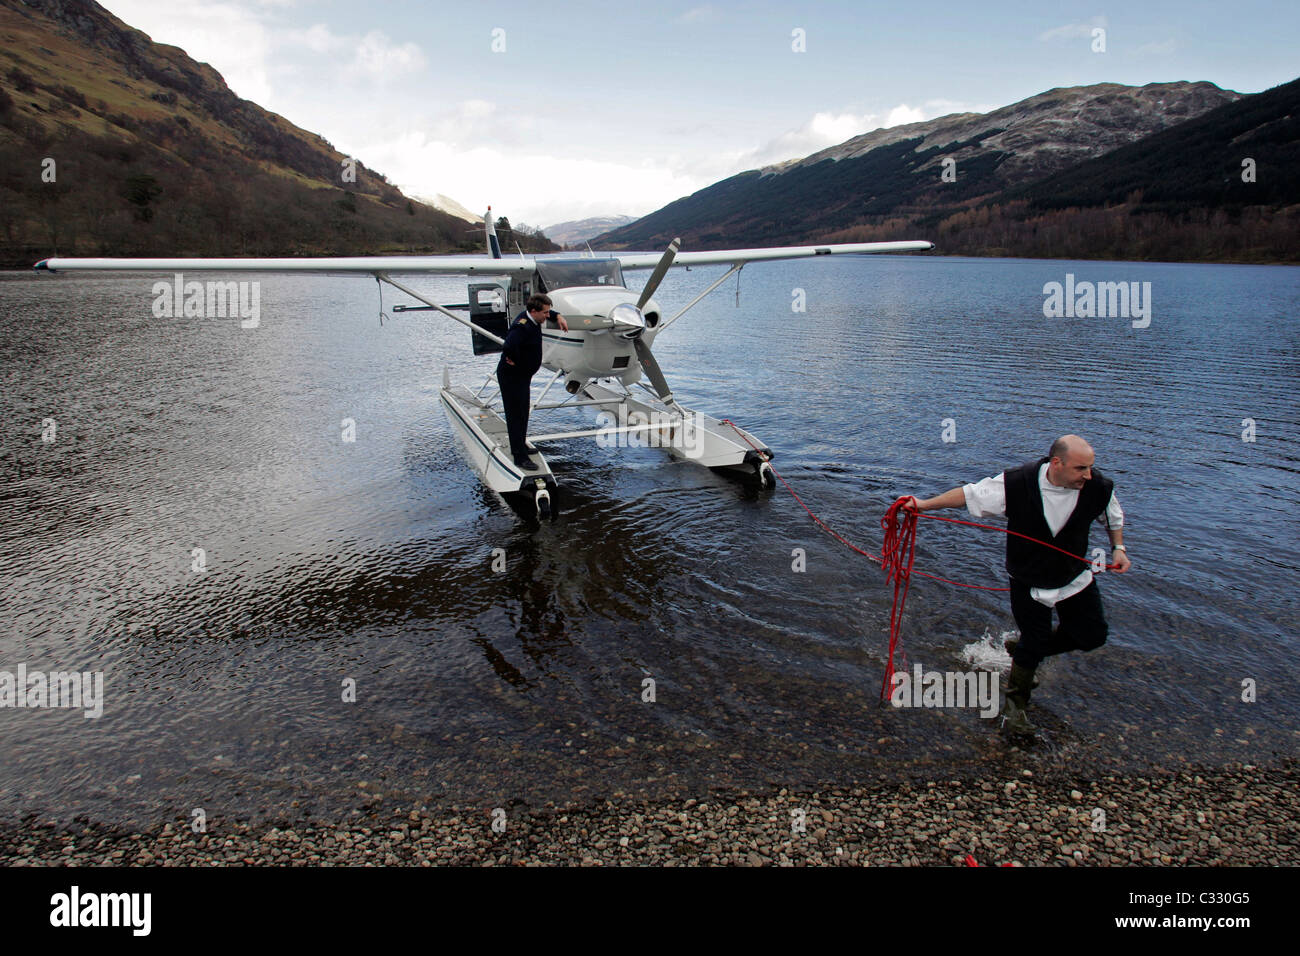 One of Loch Lomond Seaplanes aircraft on the water at Loch Voil. Stock Photo